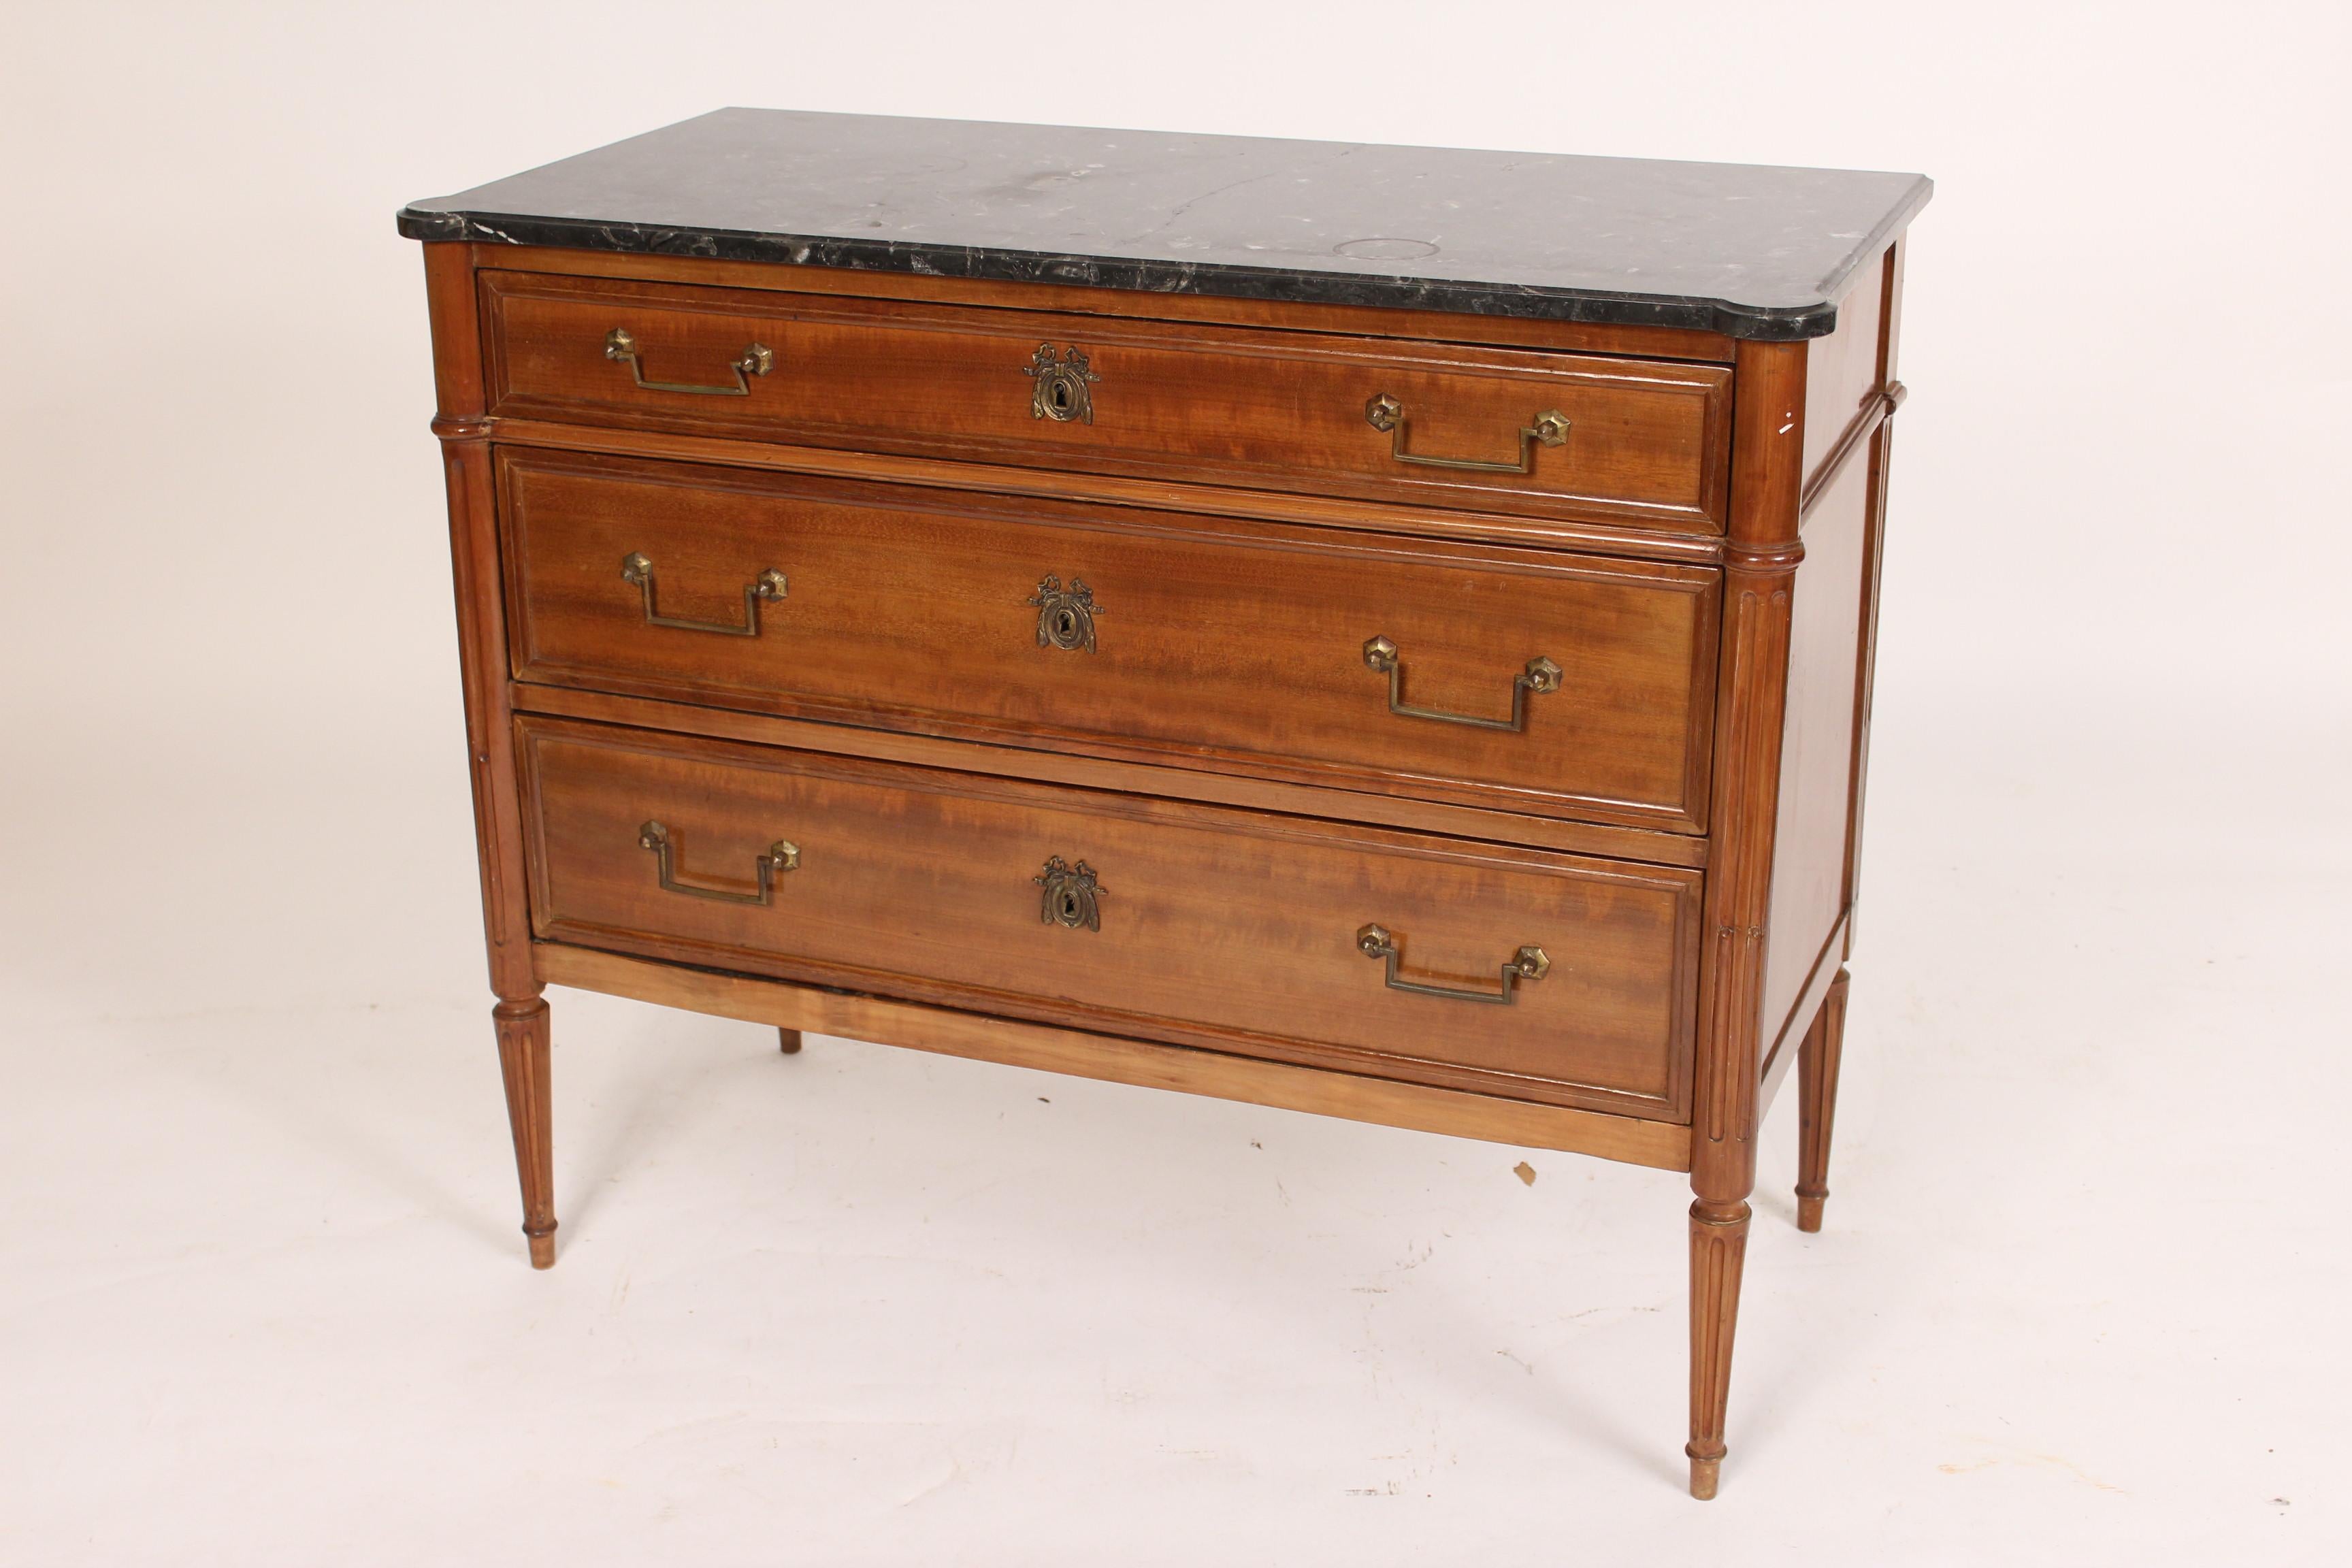 European Antique Louis XVI Style Mahogany Chest of Drawers with a Marble Top